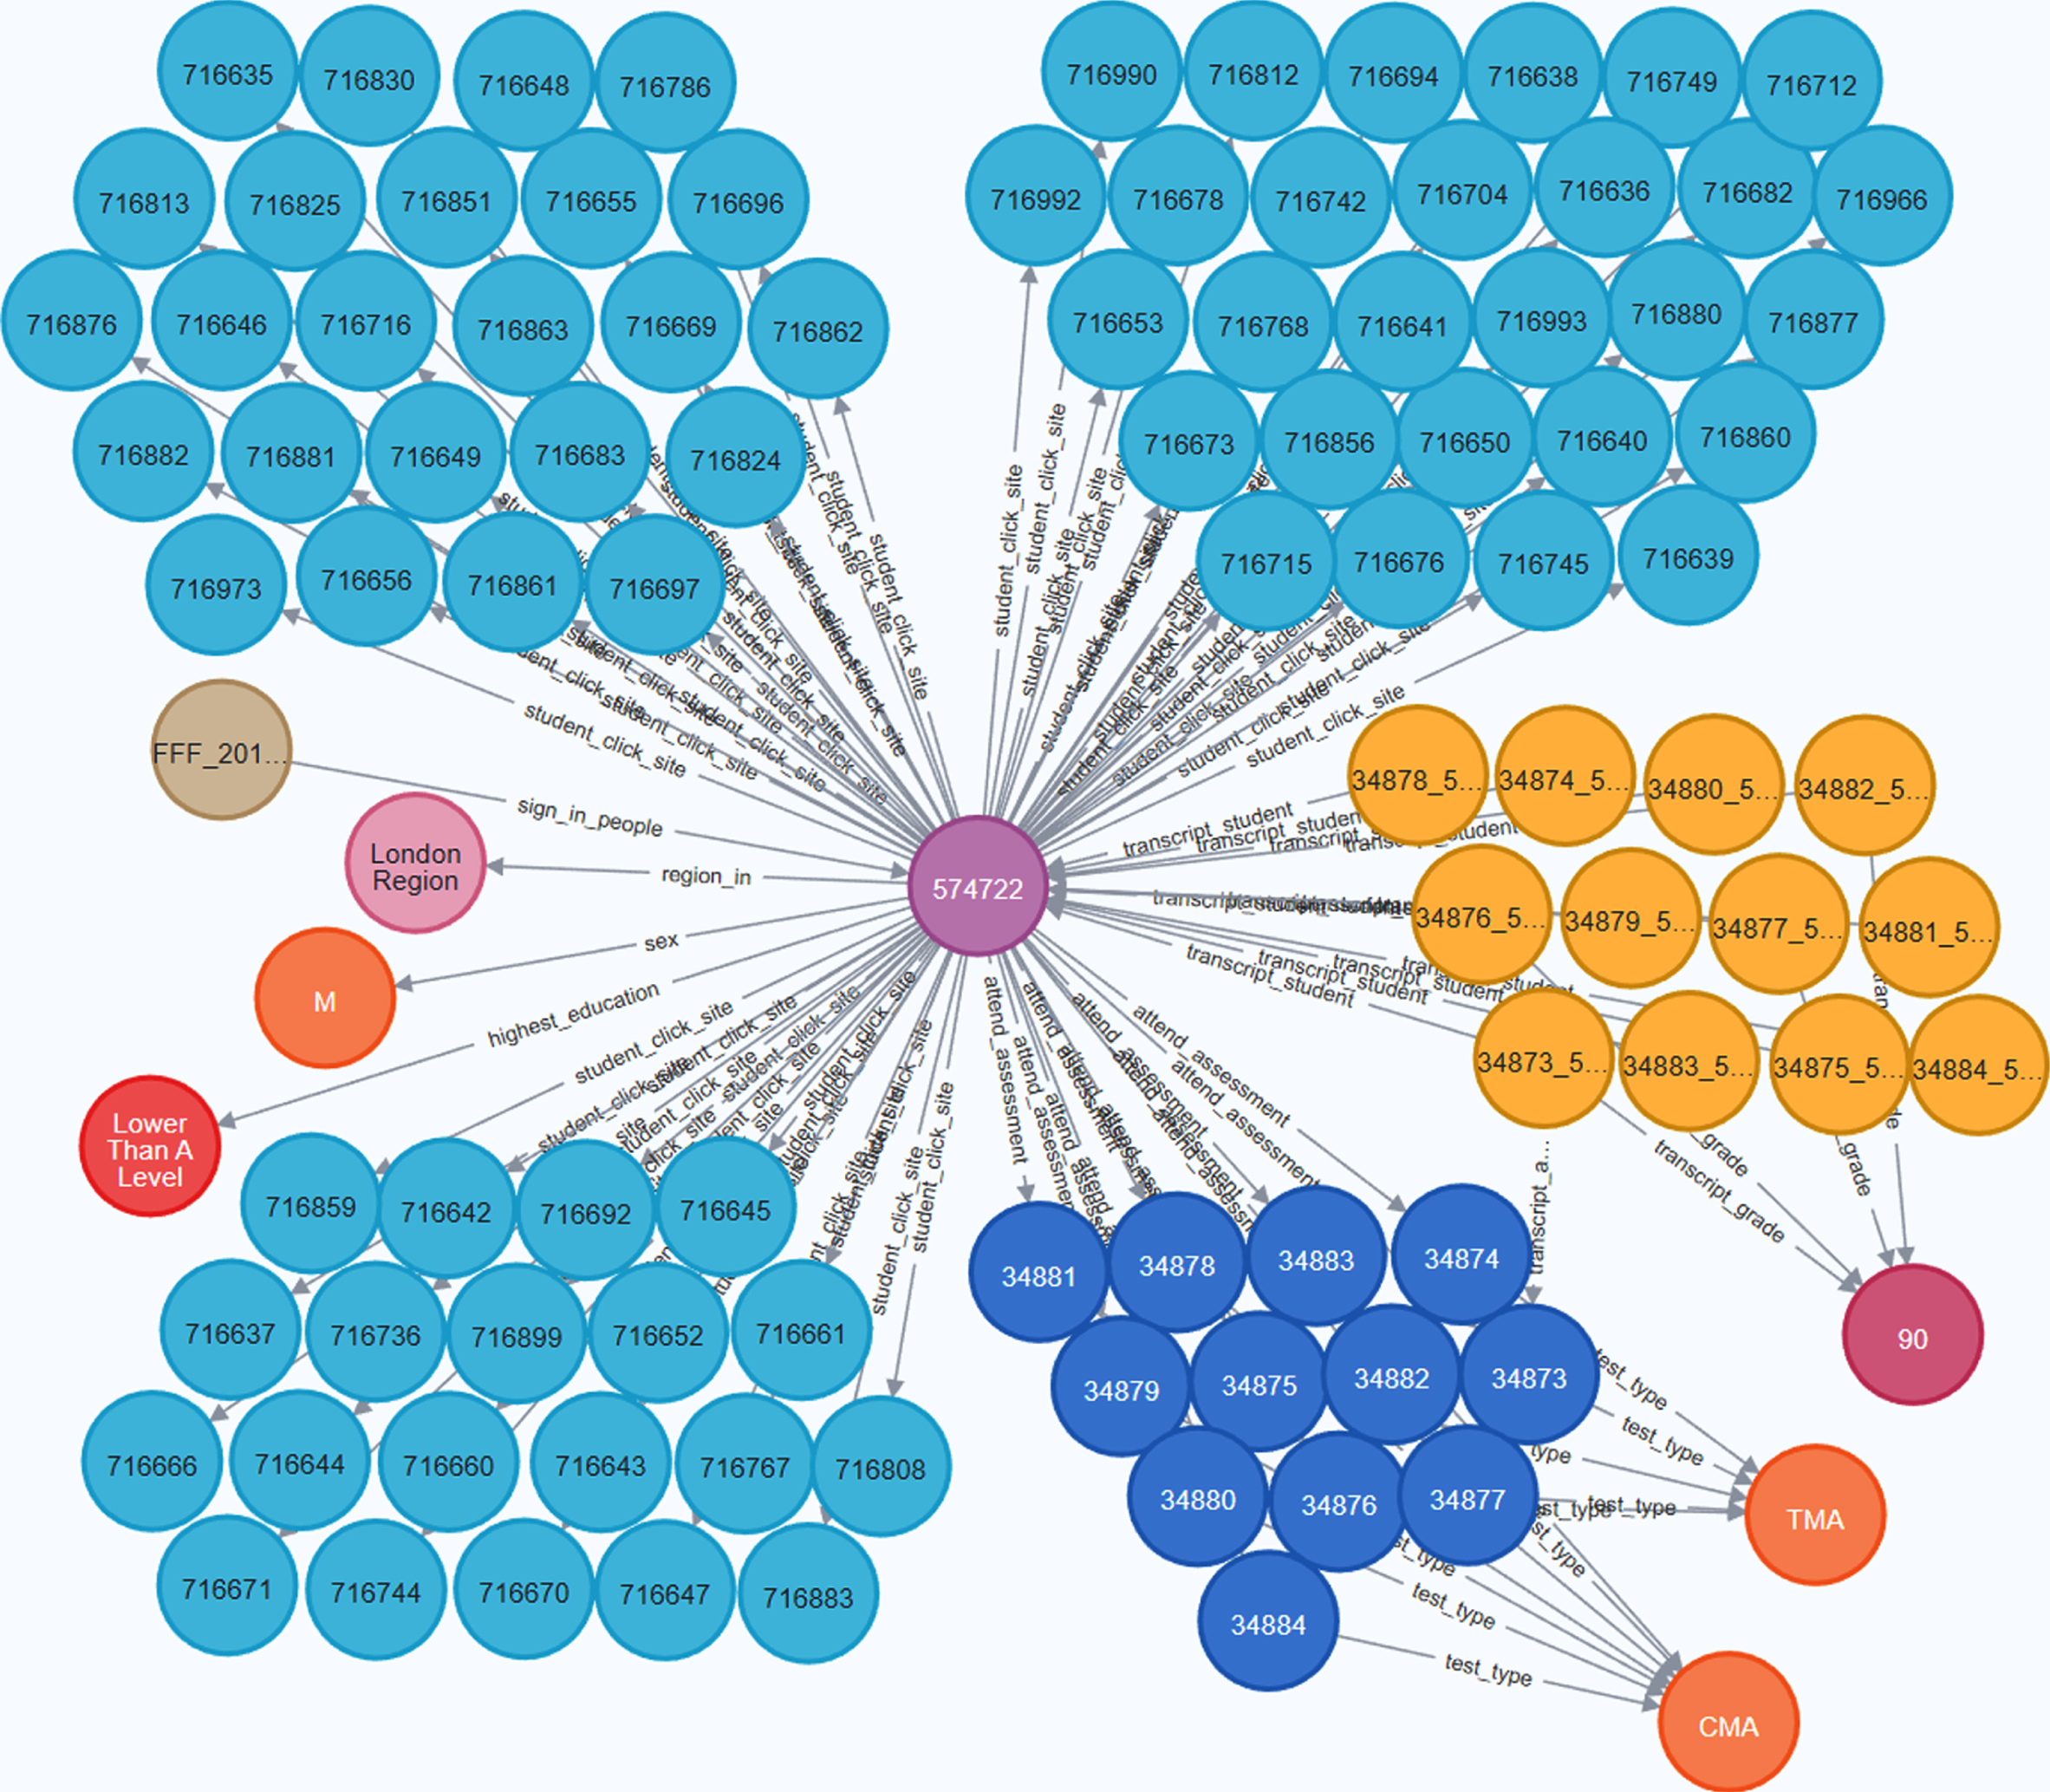 Visualization effect of knowledge graphs.